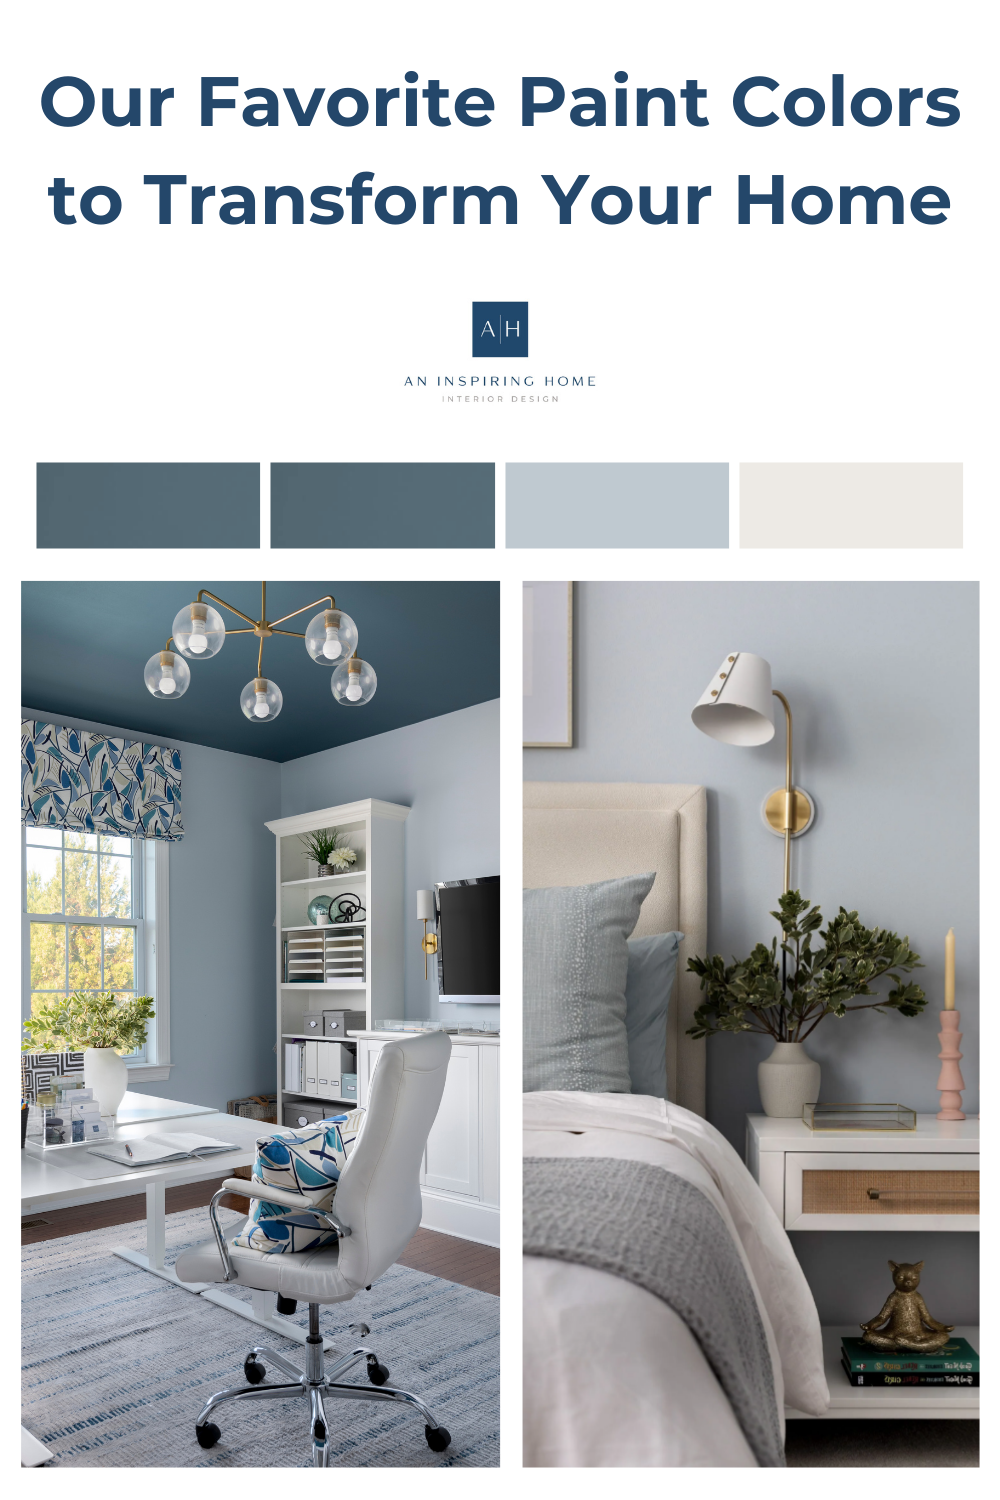 Our Favorite Paint Colors to Transform Your Home